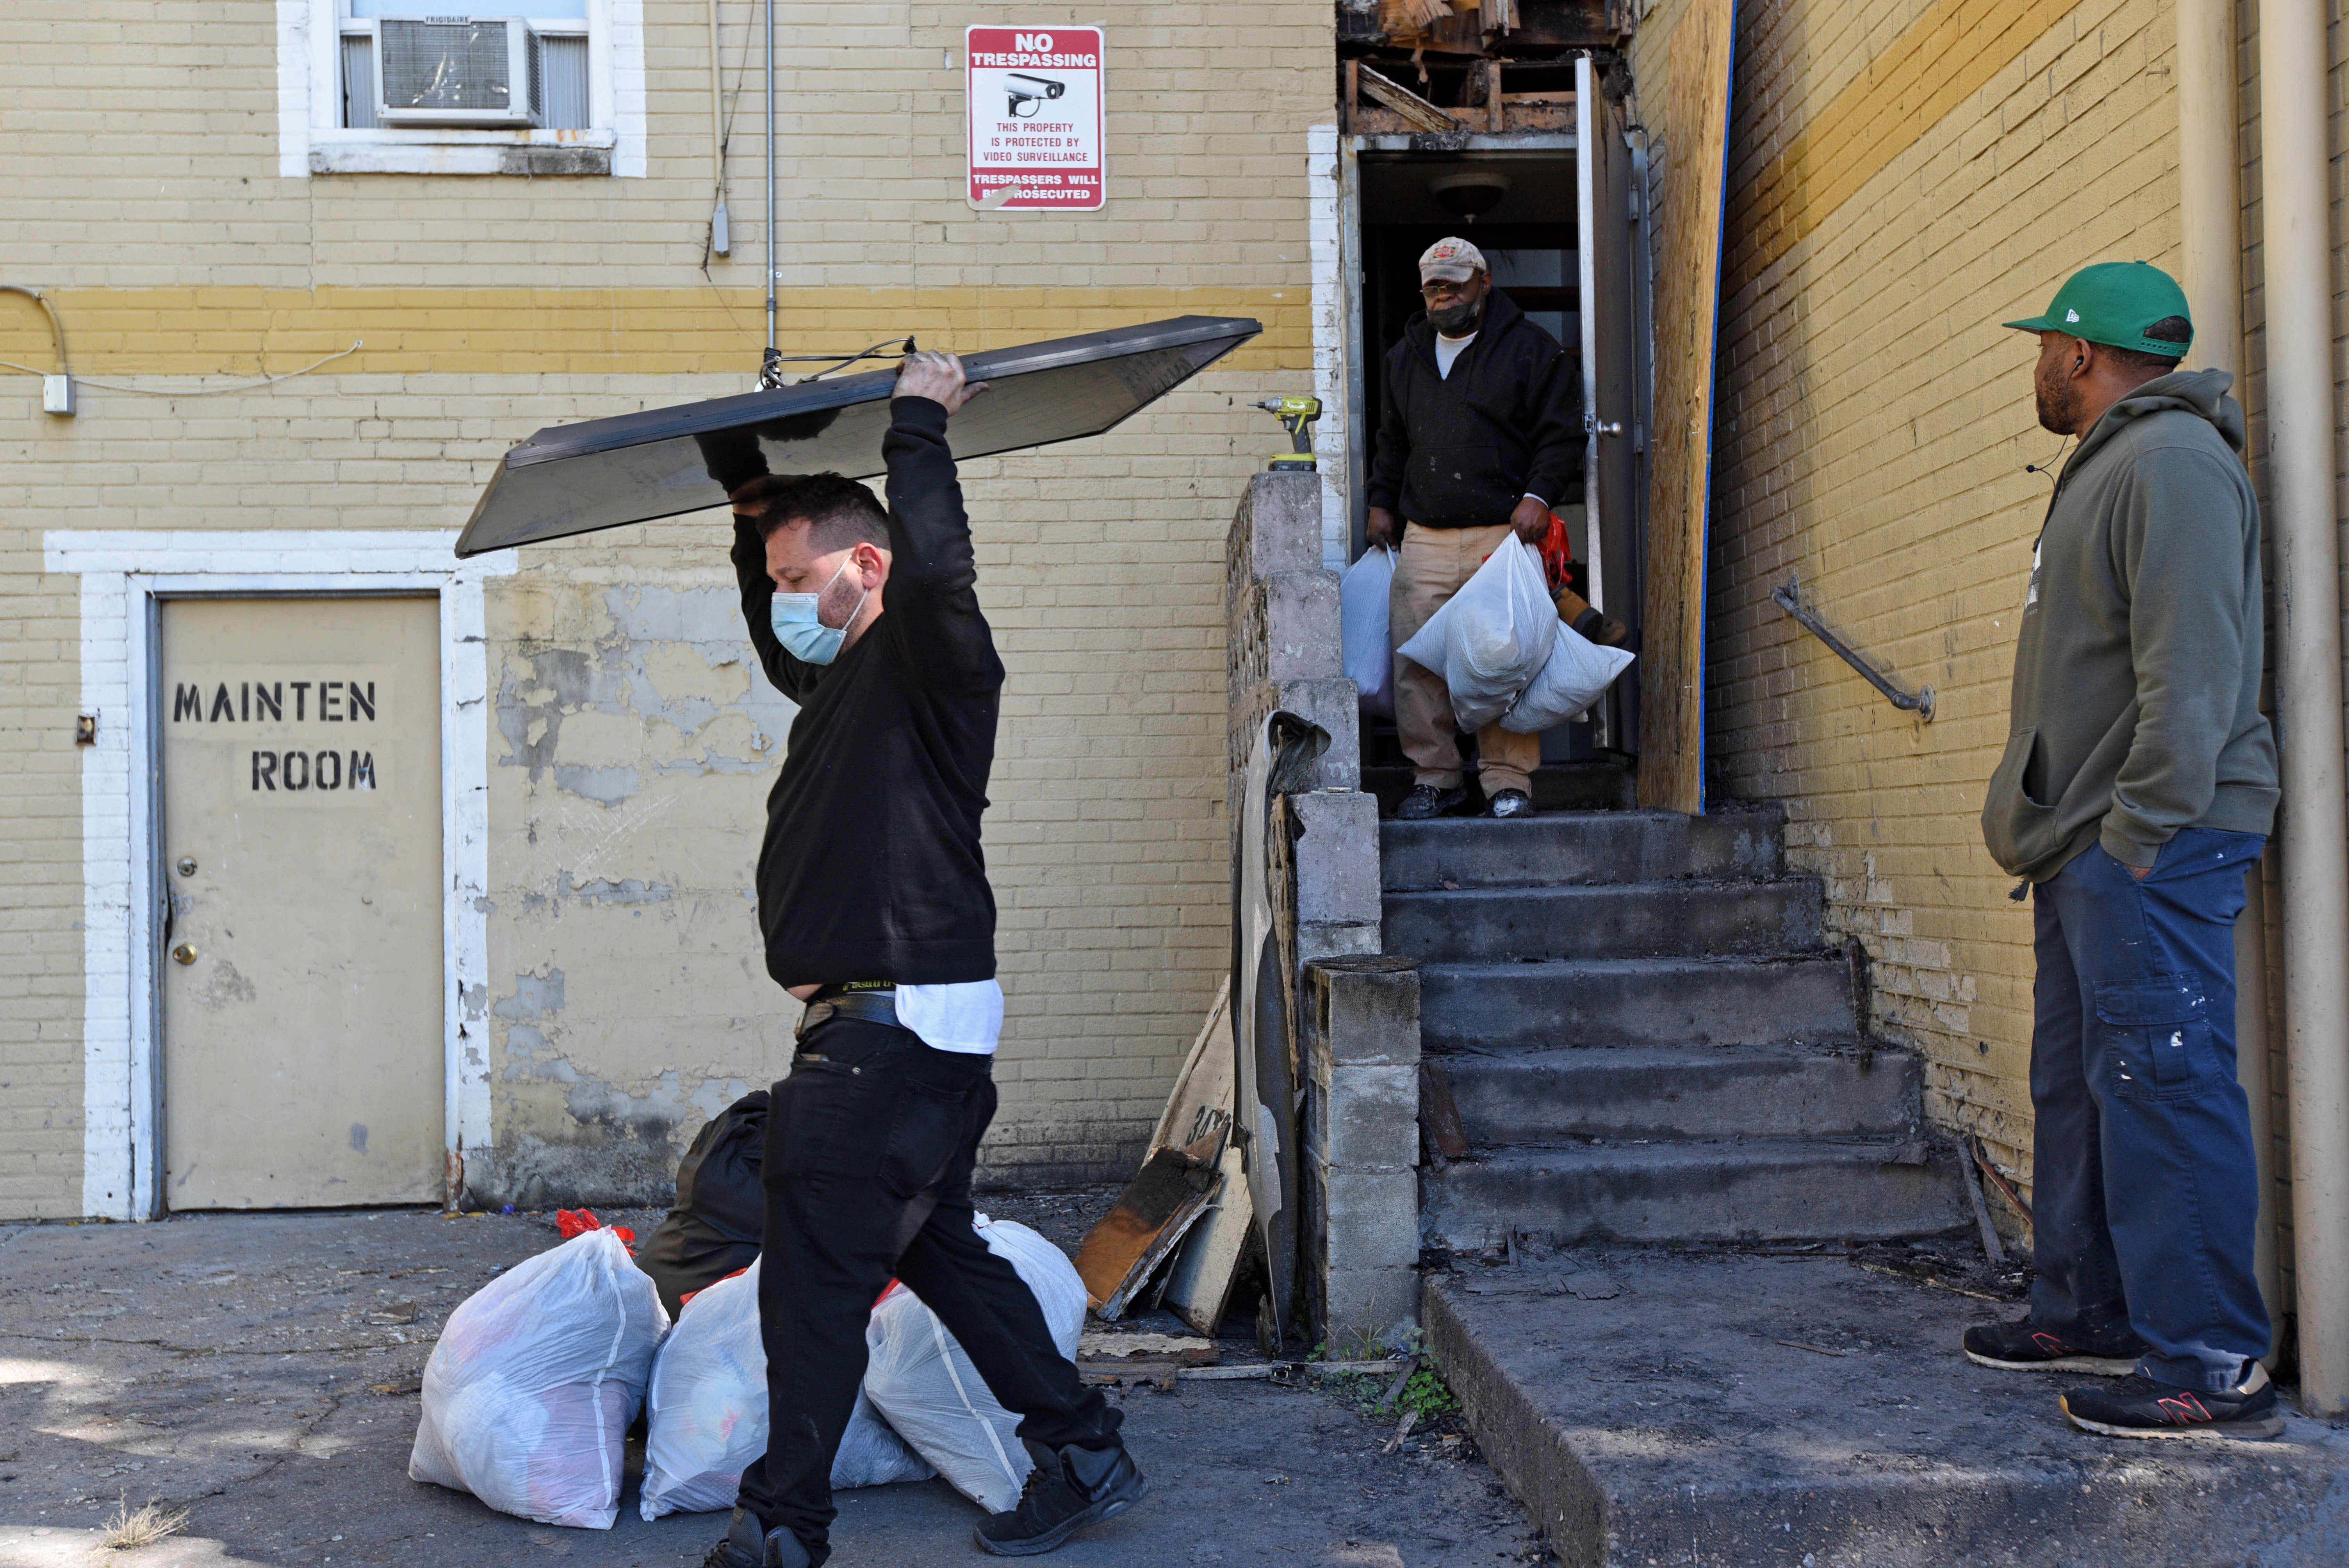 Tenants remove belongings from their apartments